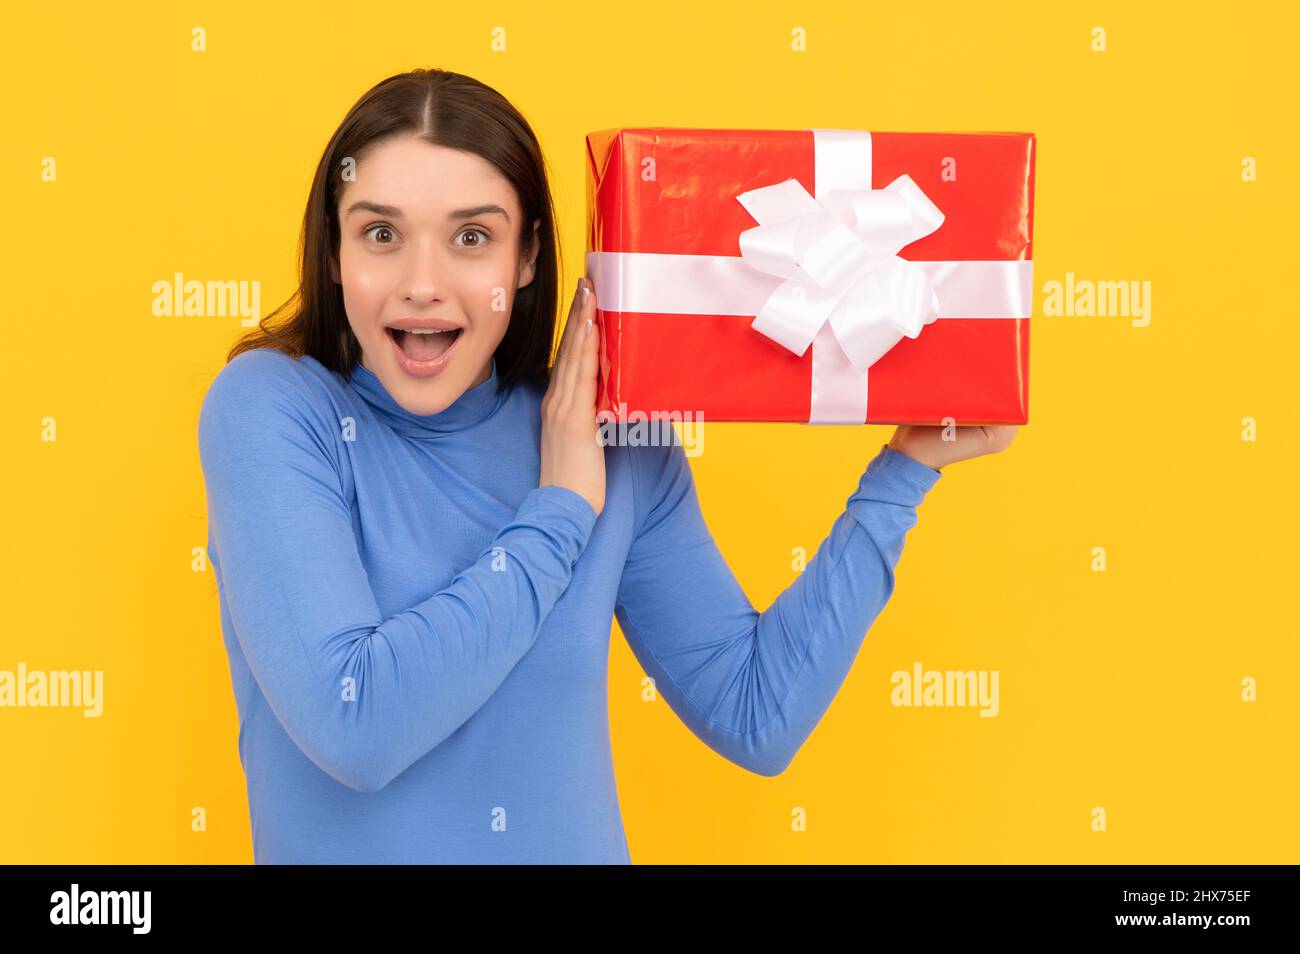 black friday discount. seasonal sales. curious girl with box on yellow background. boxing day. Stock Photo